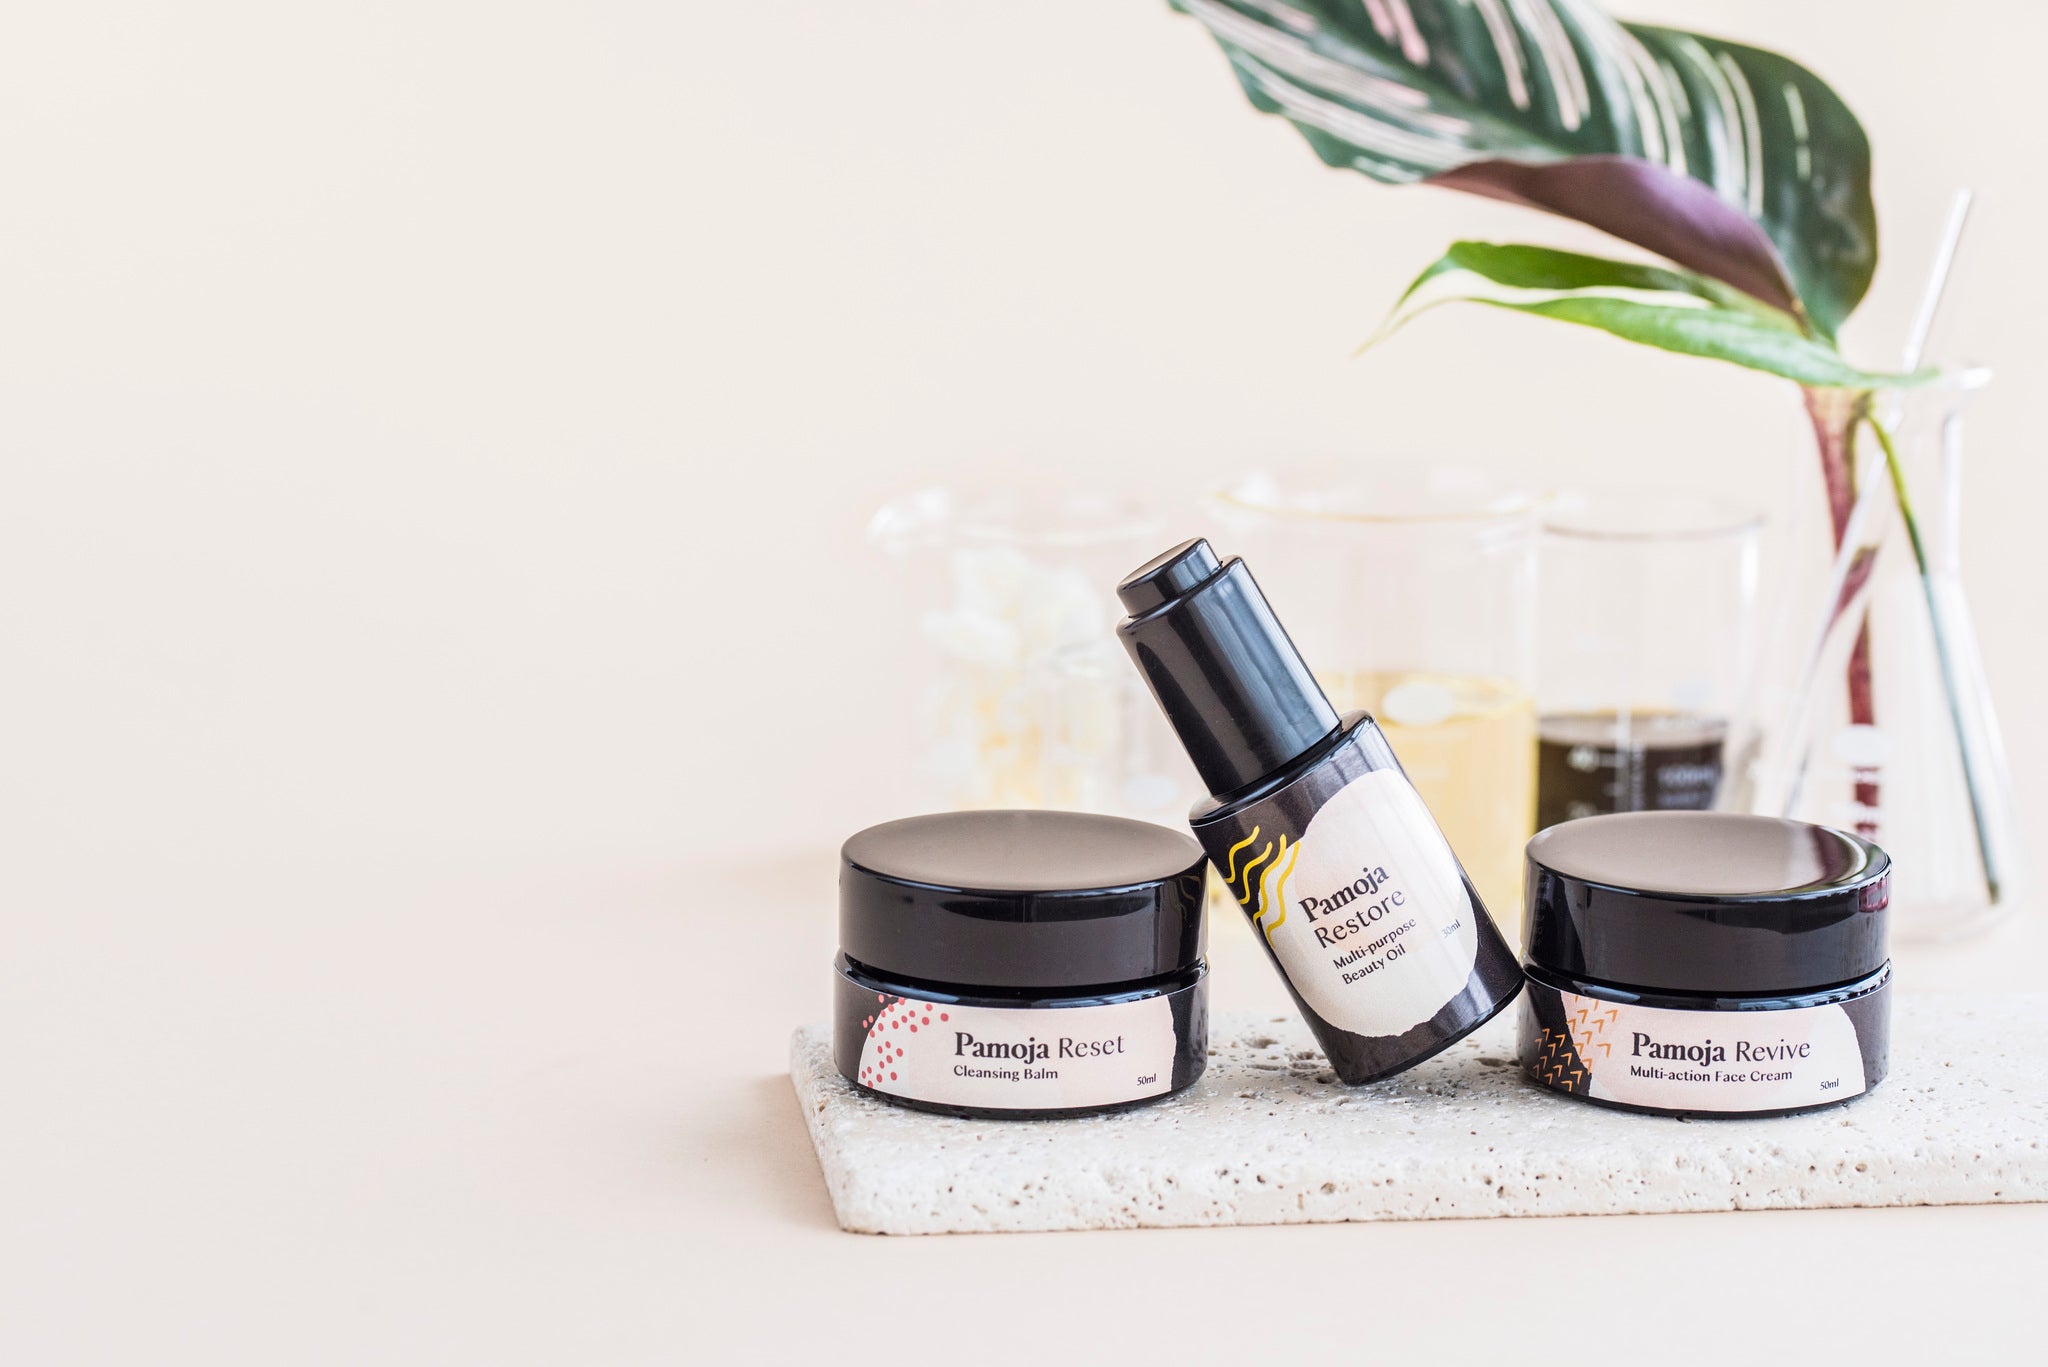 skincare at home selfcare wellbeing natural organic vegan and cruelty free sustainable how to get glowing skin naturally stress dry sensitive skin products